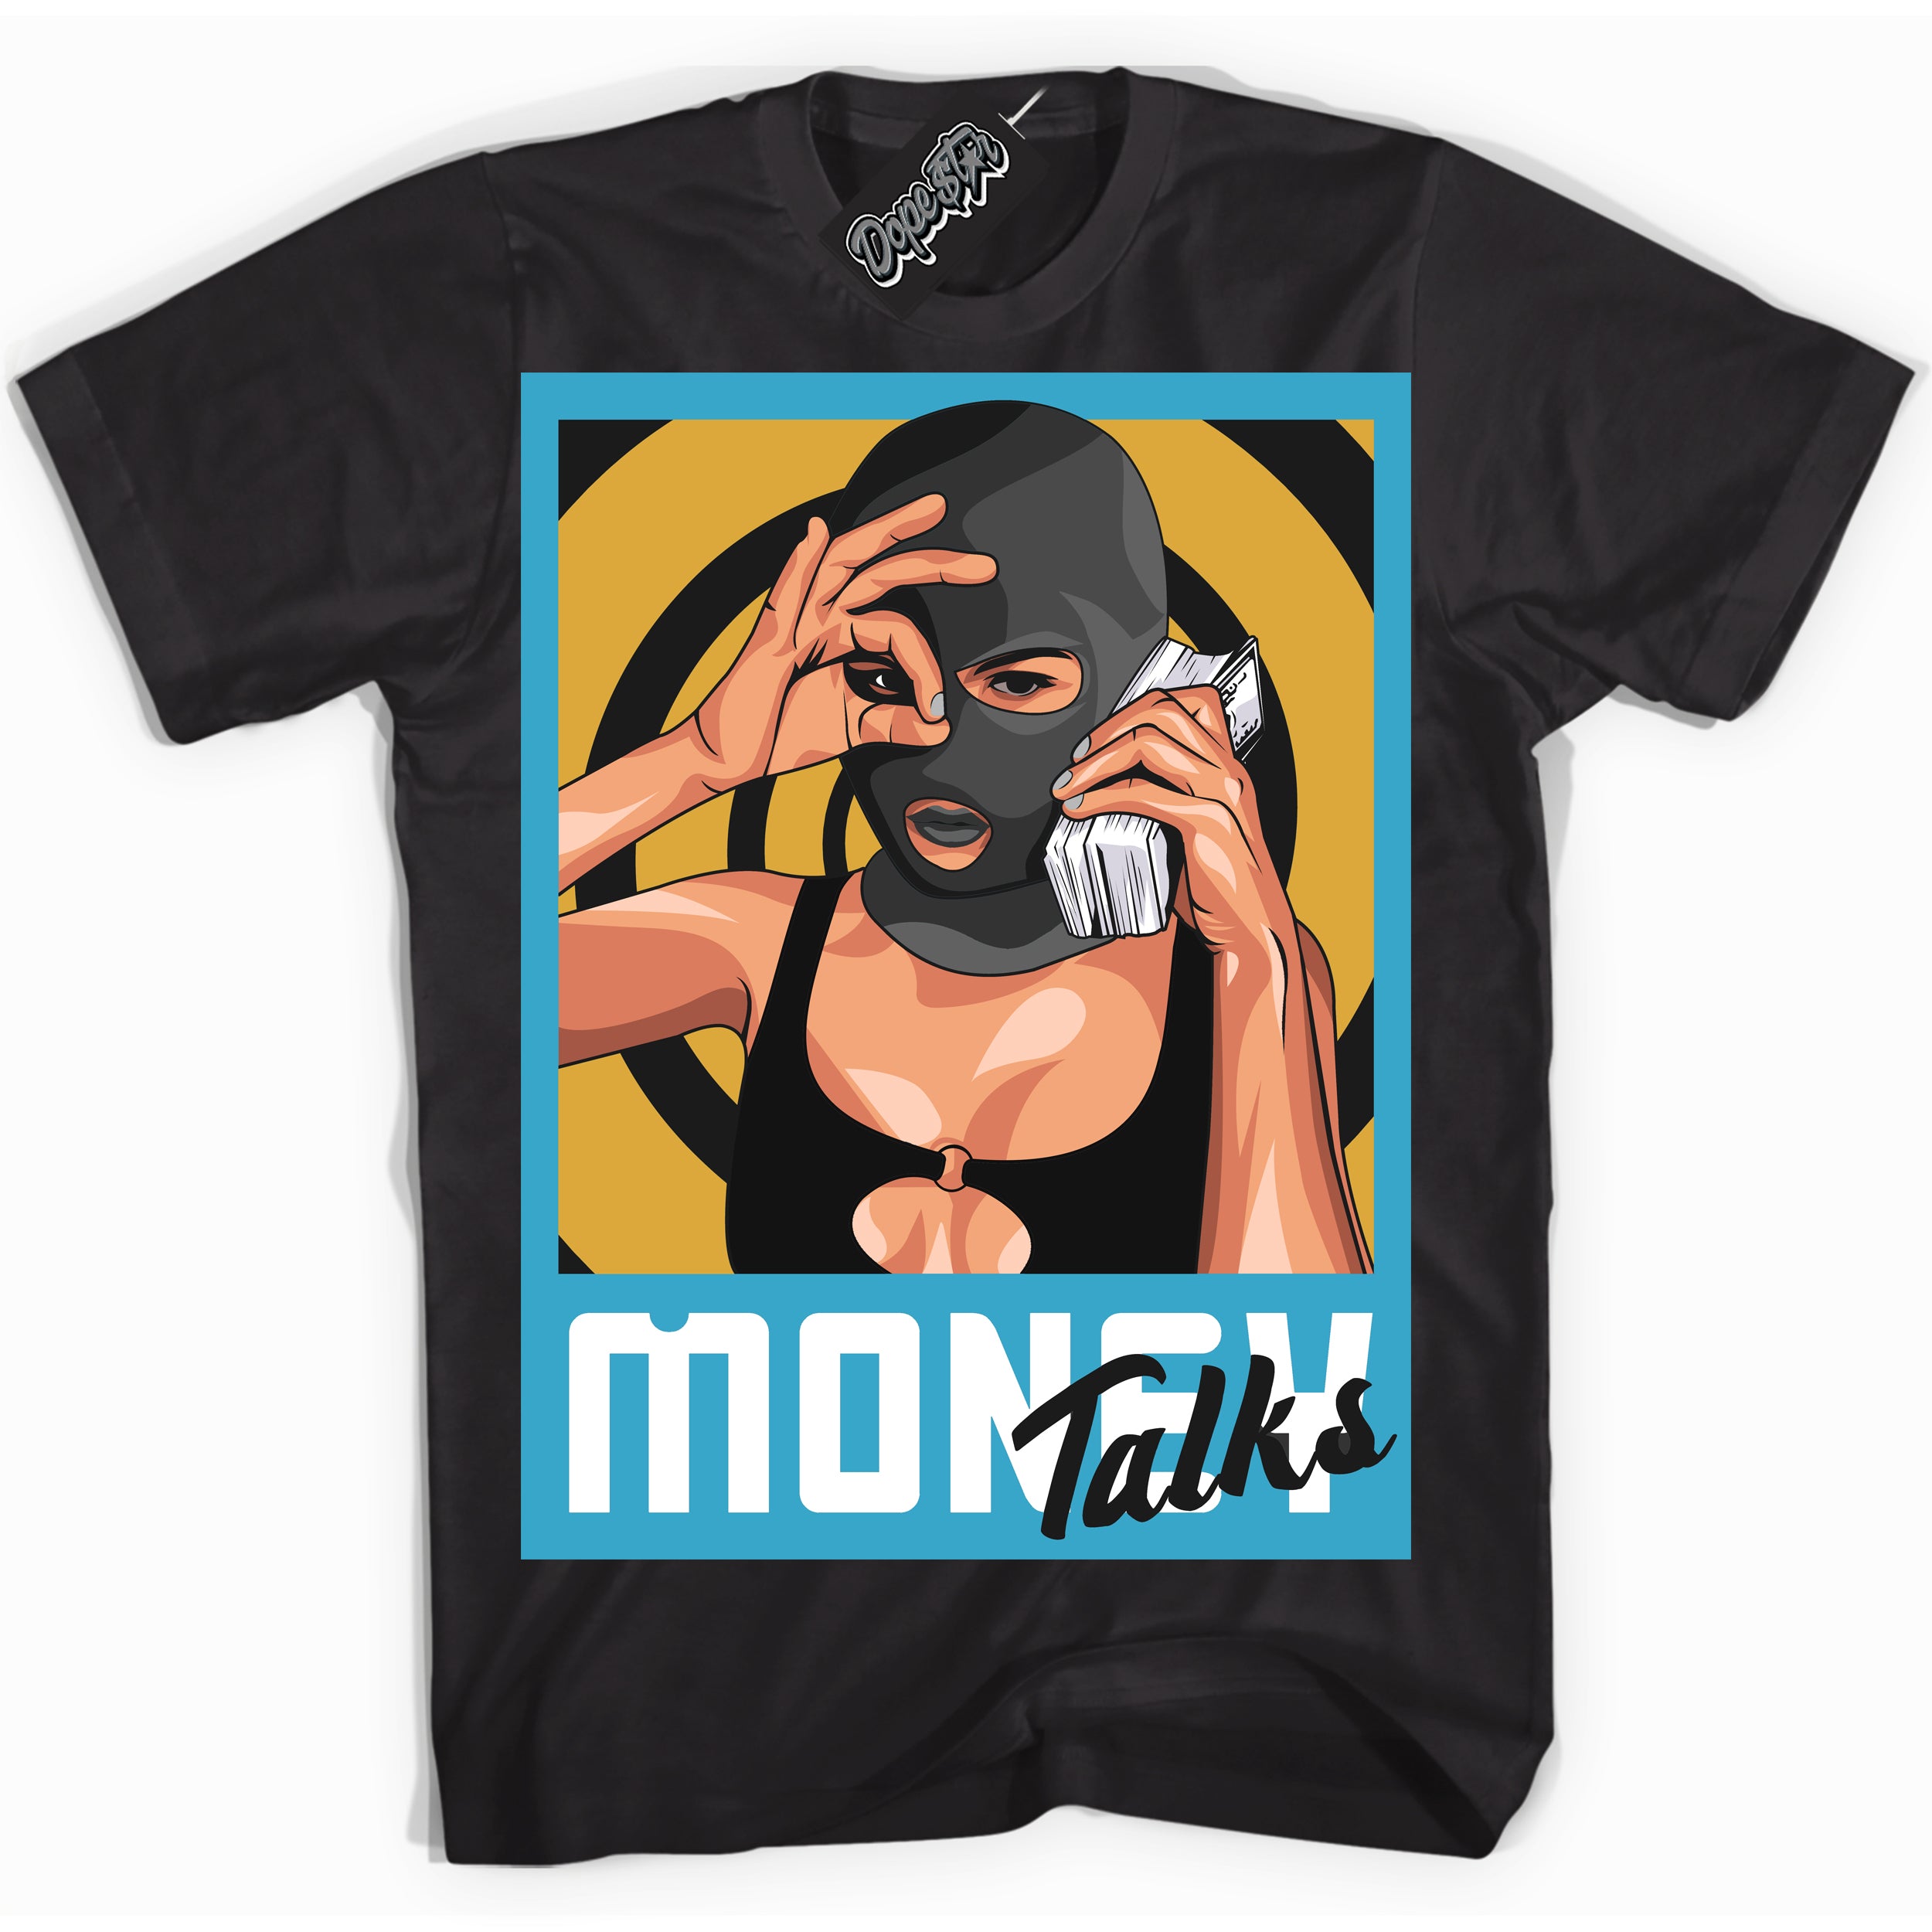 Cool Black Shirt with “ Money Talks” design that perfectly matches Aqua 5s Sneakers.